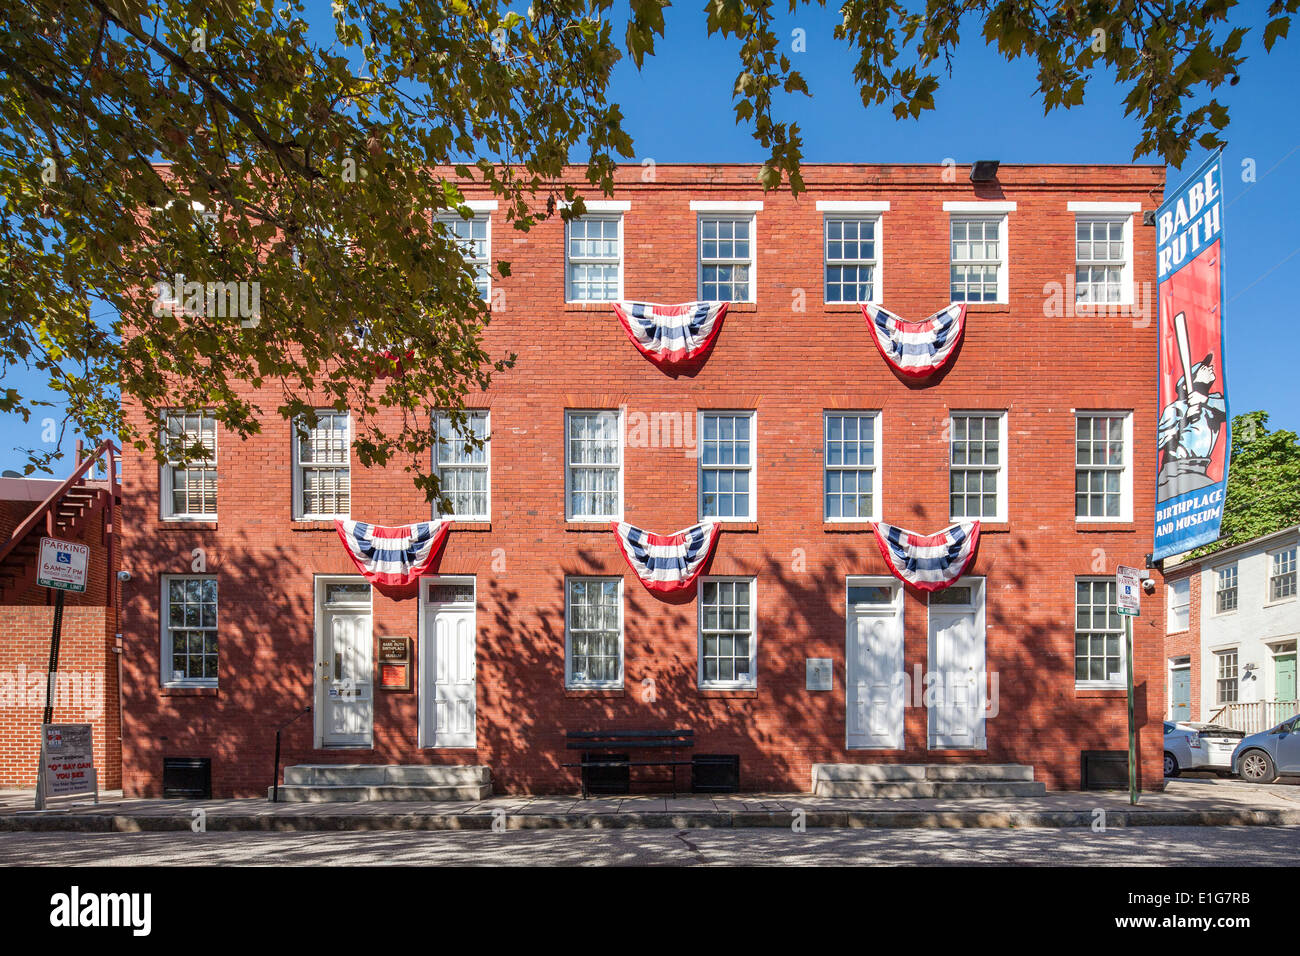 Baltimore, Maryland, Babe Ruth Birthplace Museum at 216 Emory Street. Stock Photo